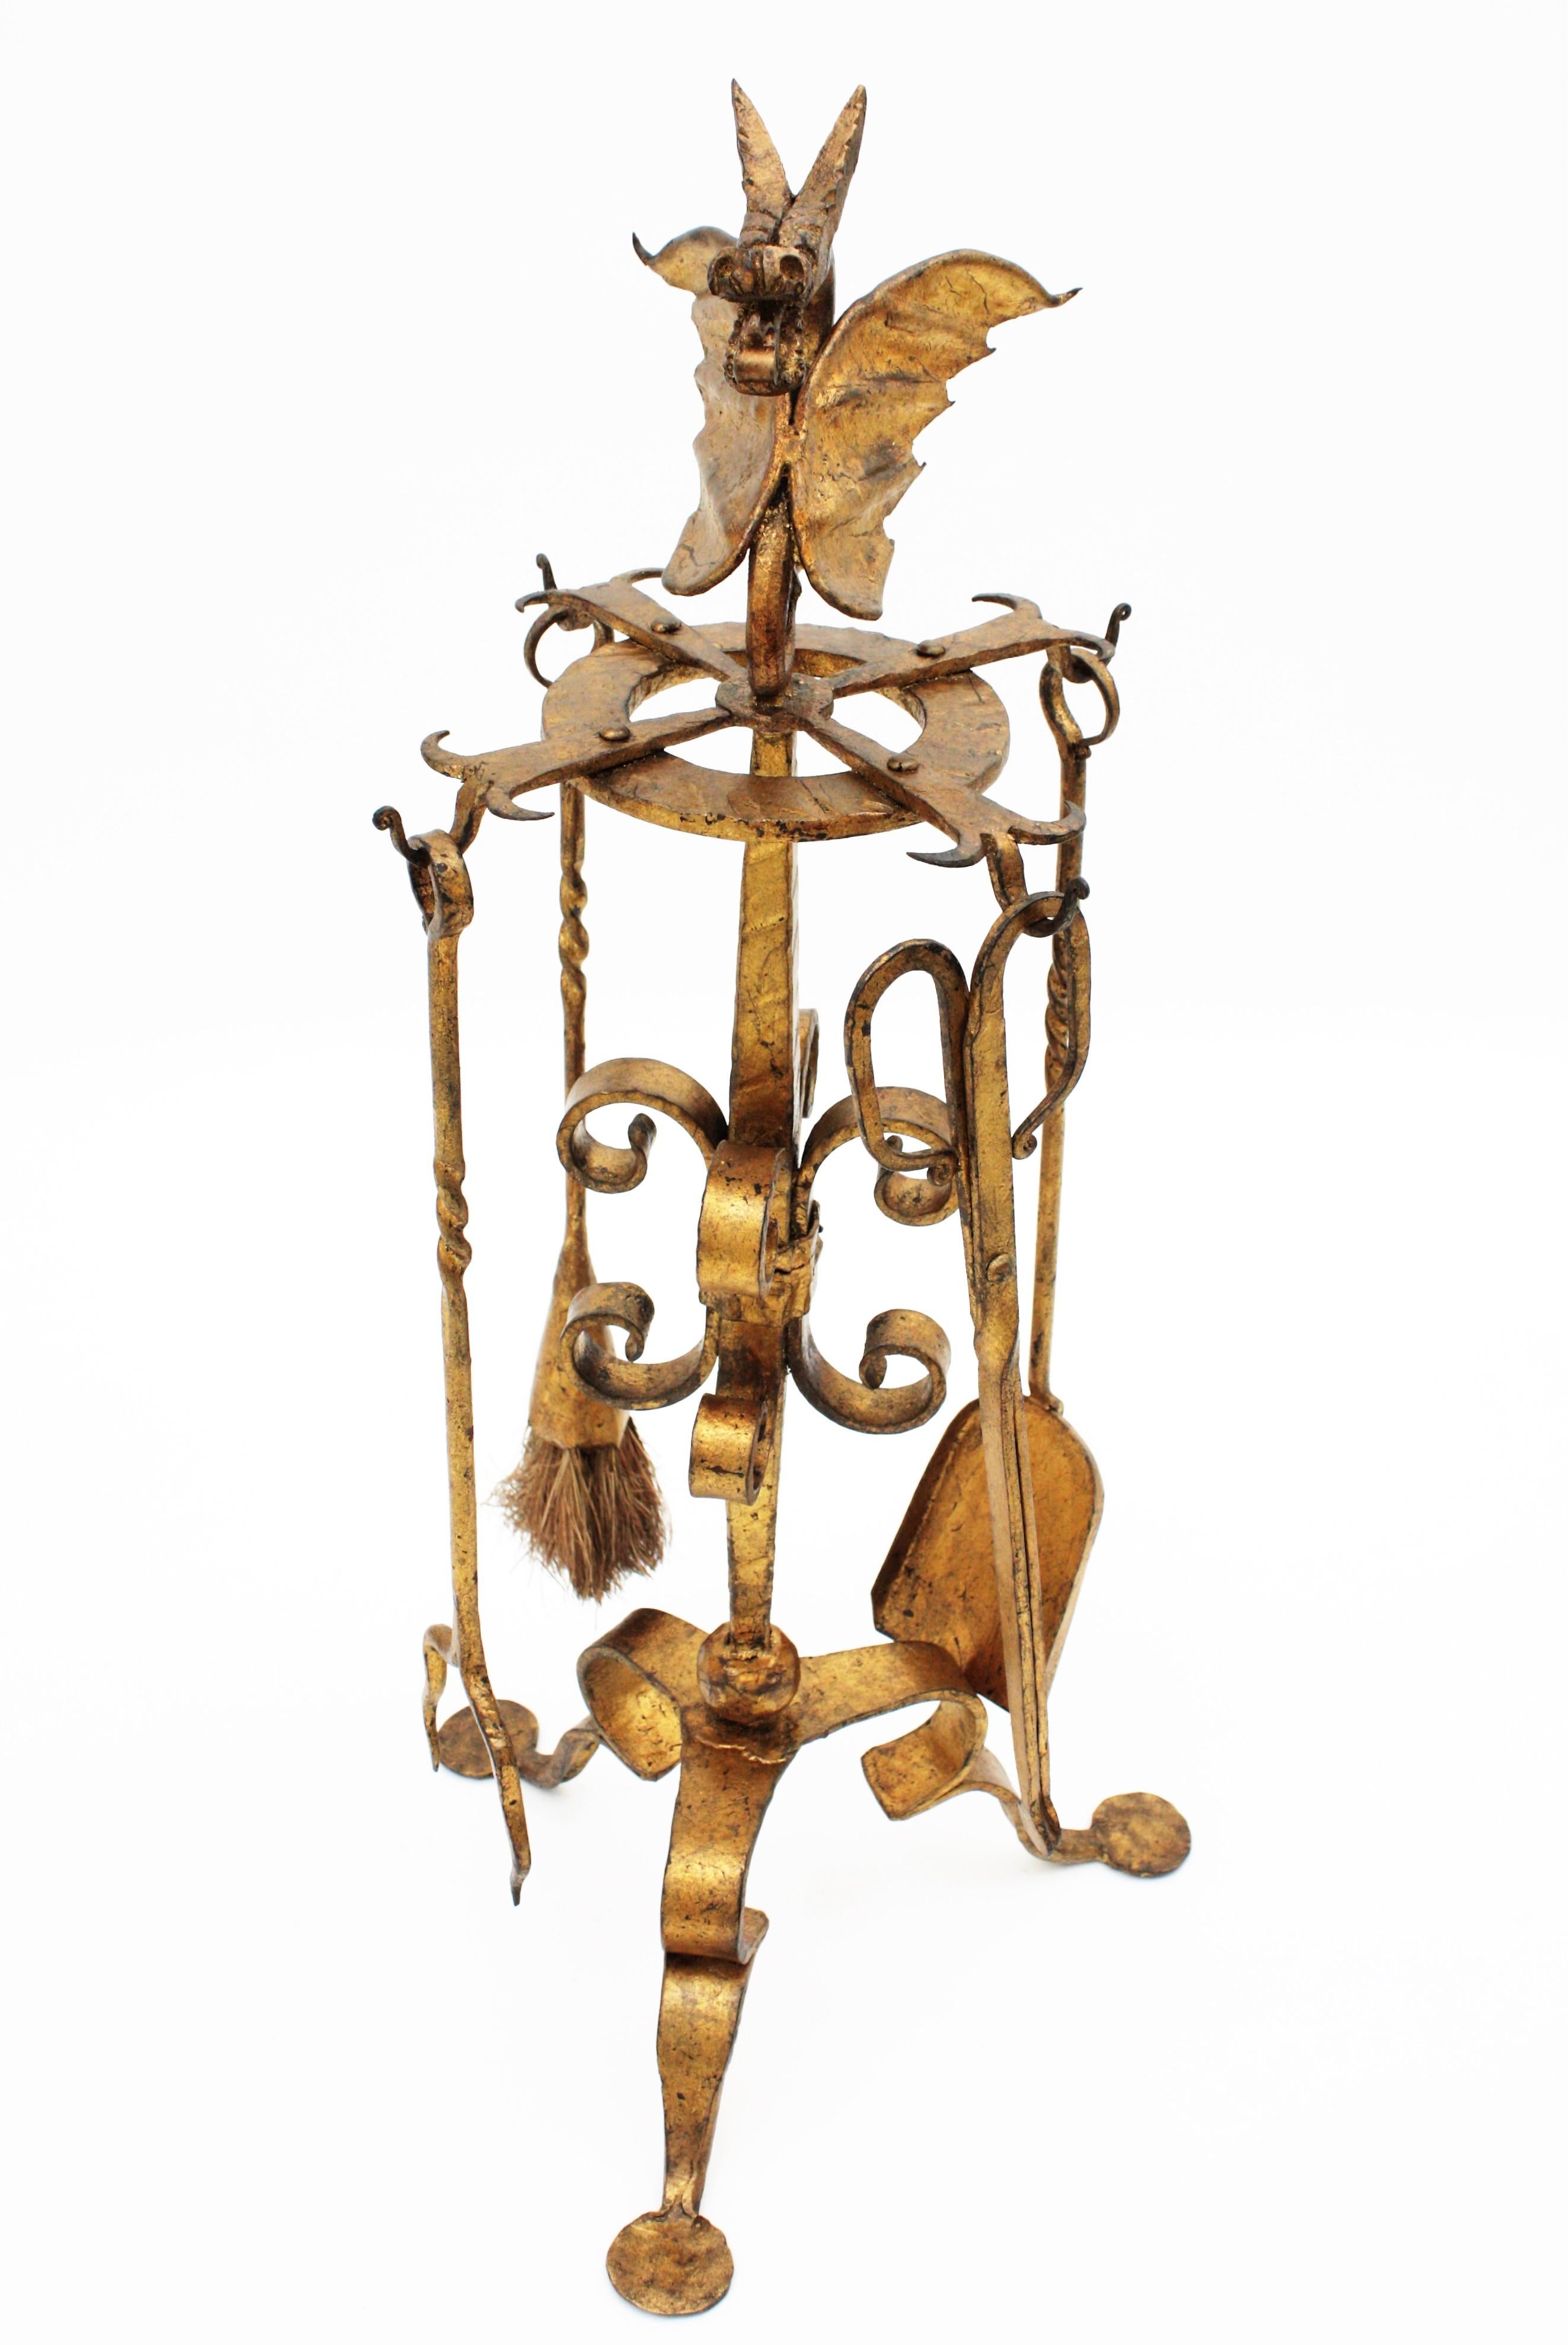 20th Century Spanish Gothic Revival Fireplace Tools Stand in Gilt Iron with Dragon Motif 